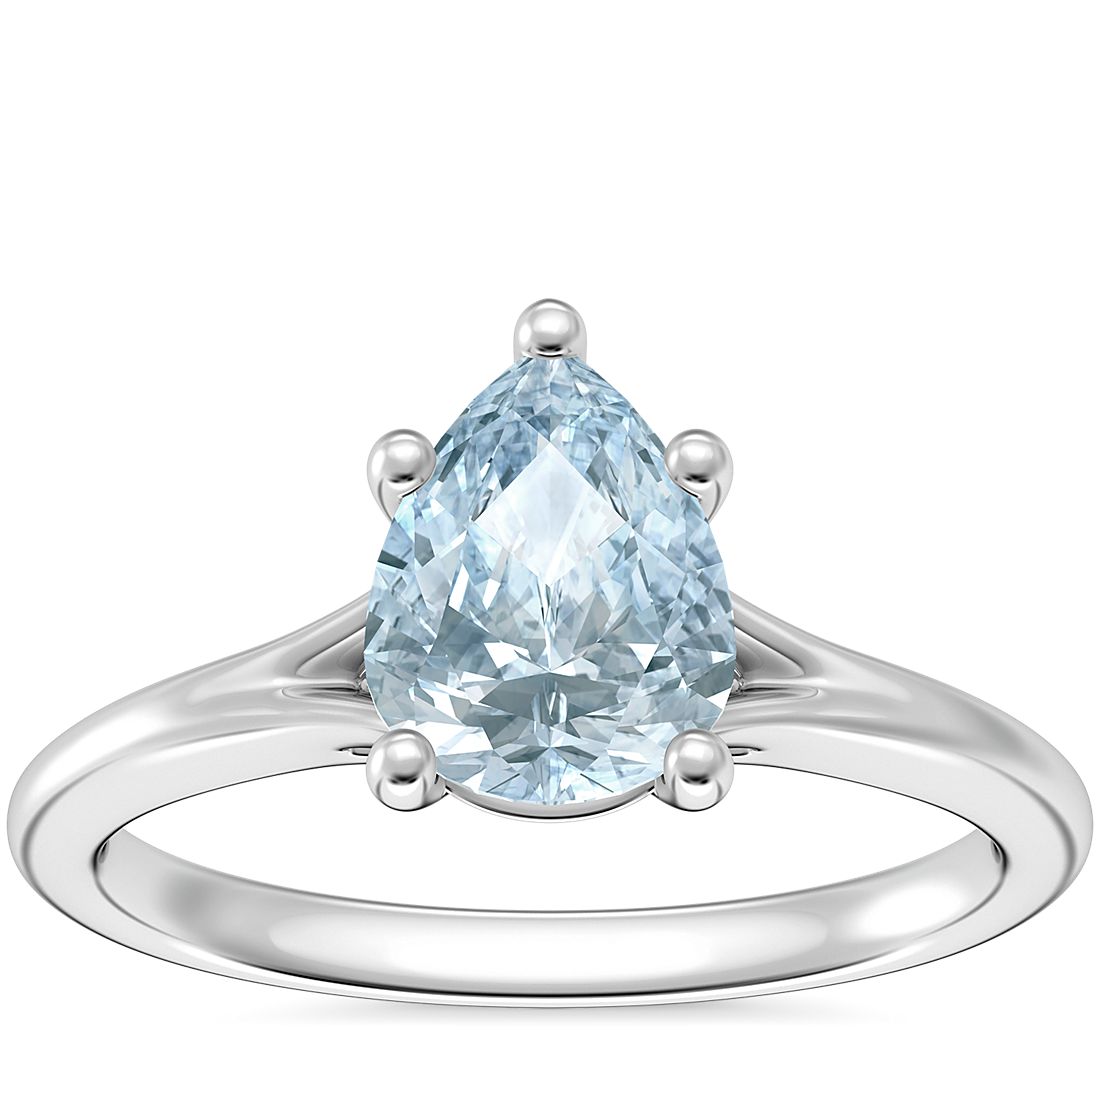 Petite Split Shank Solitaire Engagement Ring with Pear-Shaped Aquamarine in 18k White Gold (8x6mm)